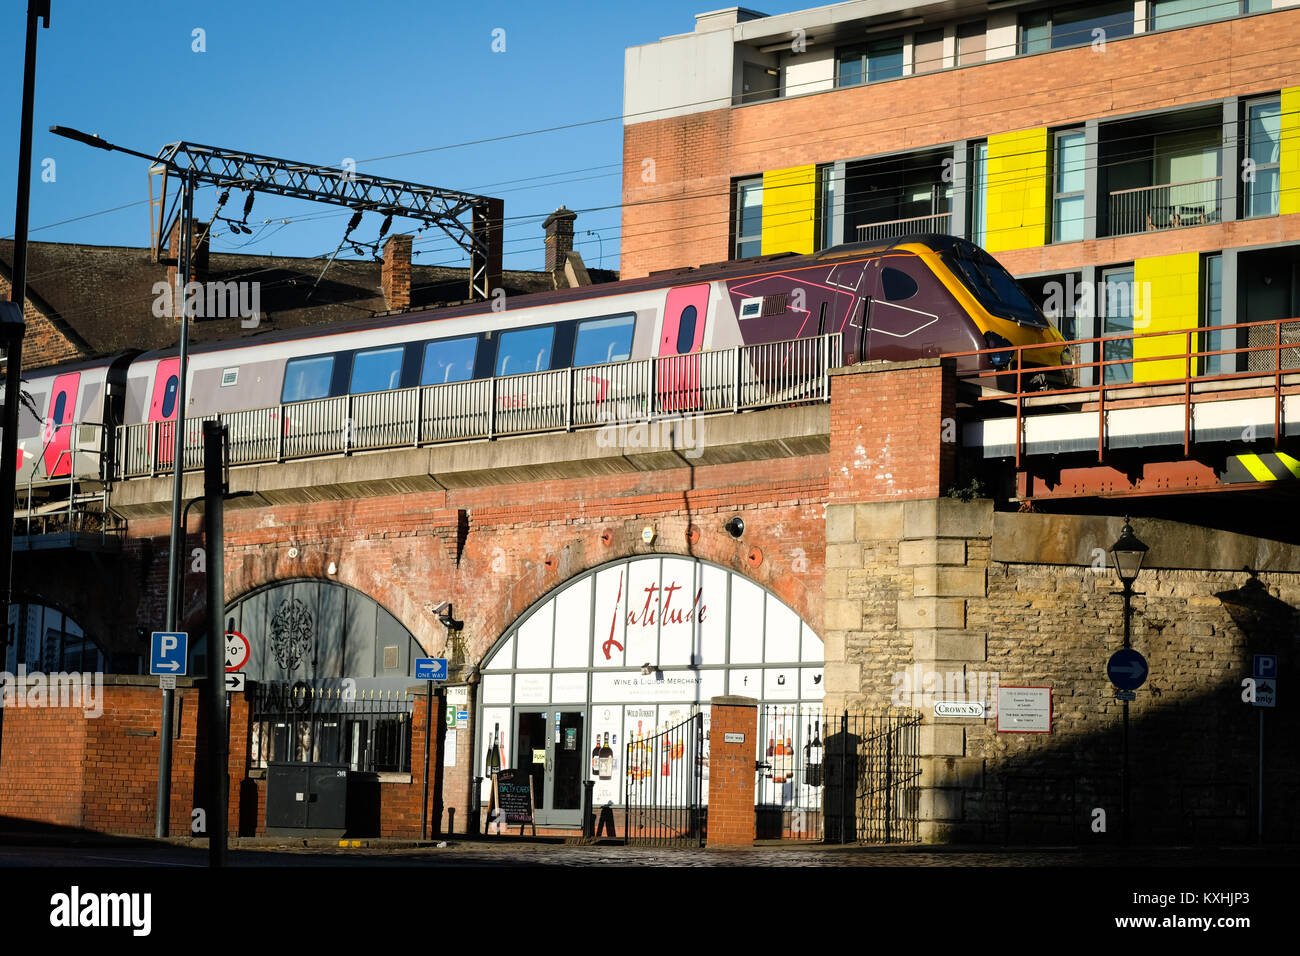 A CrossCounty train passing over shops and buildings on an elevate rail track in Leeds city centre, Yorkshire, UK Stock Photo